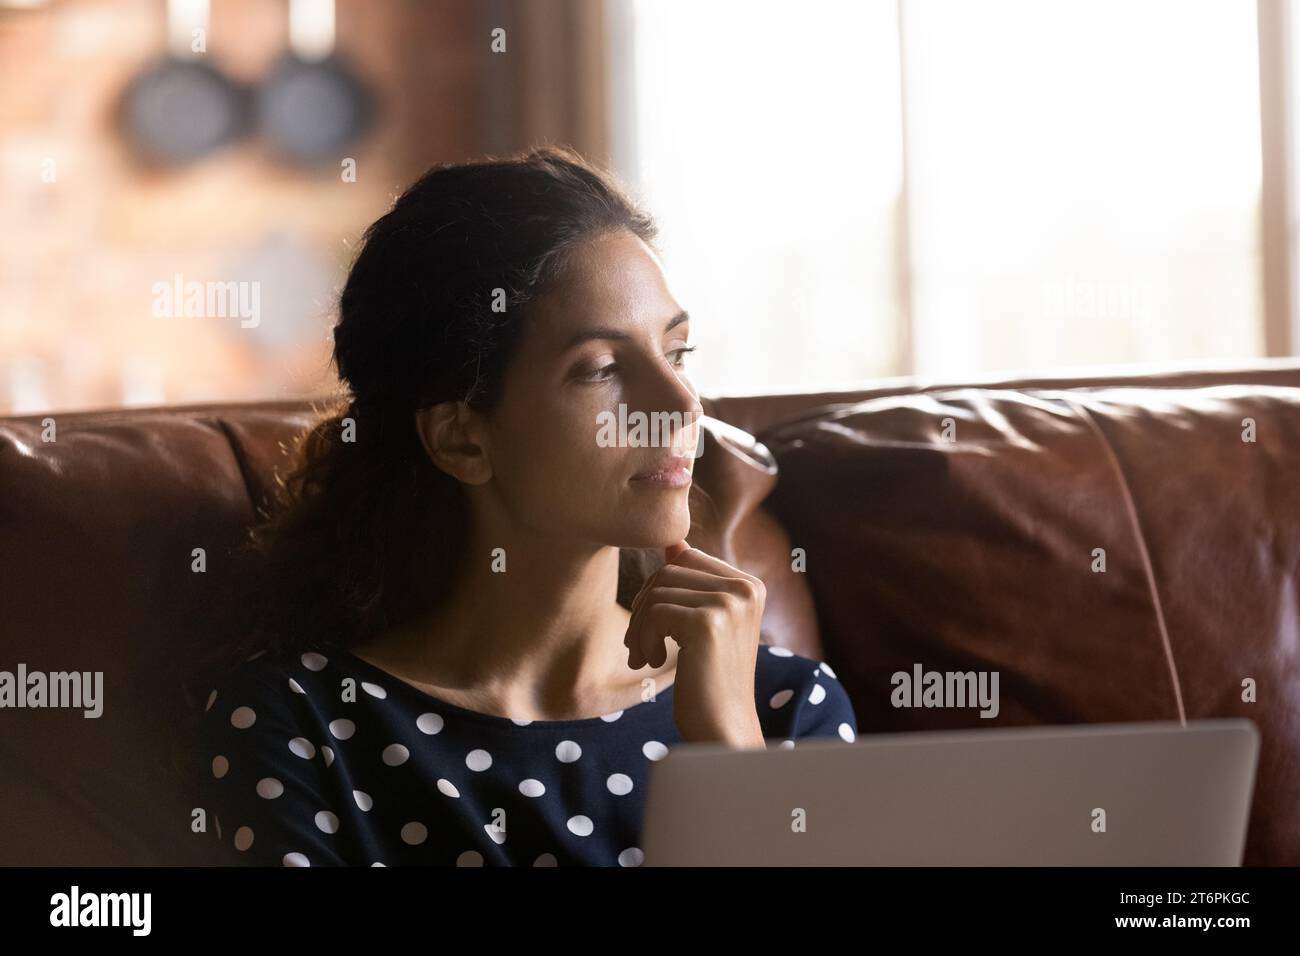 Close up thoughtful woman distracted from laptop, sitting on couch Stock Photo